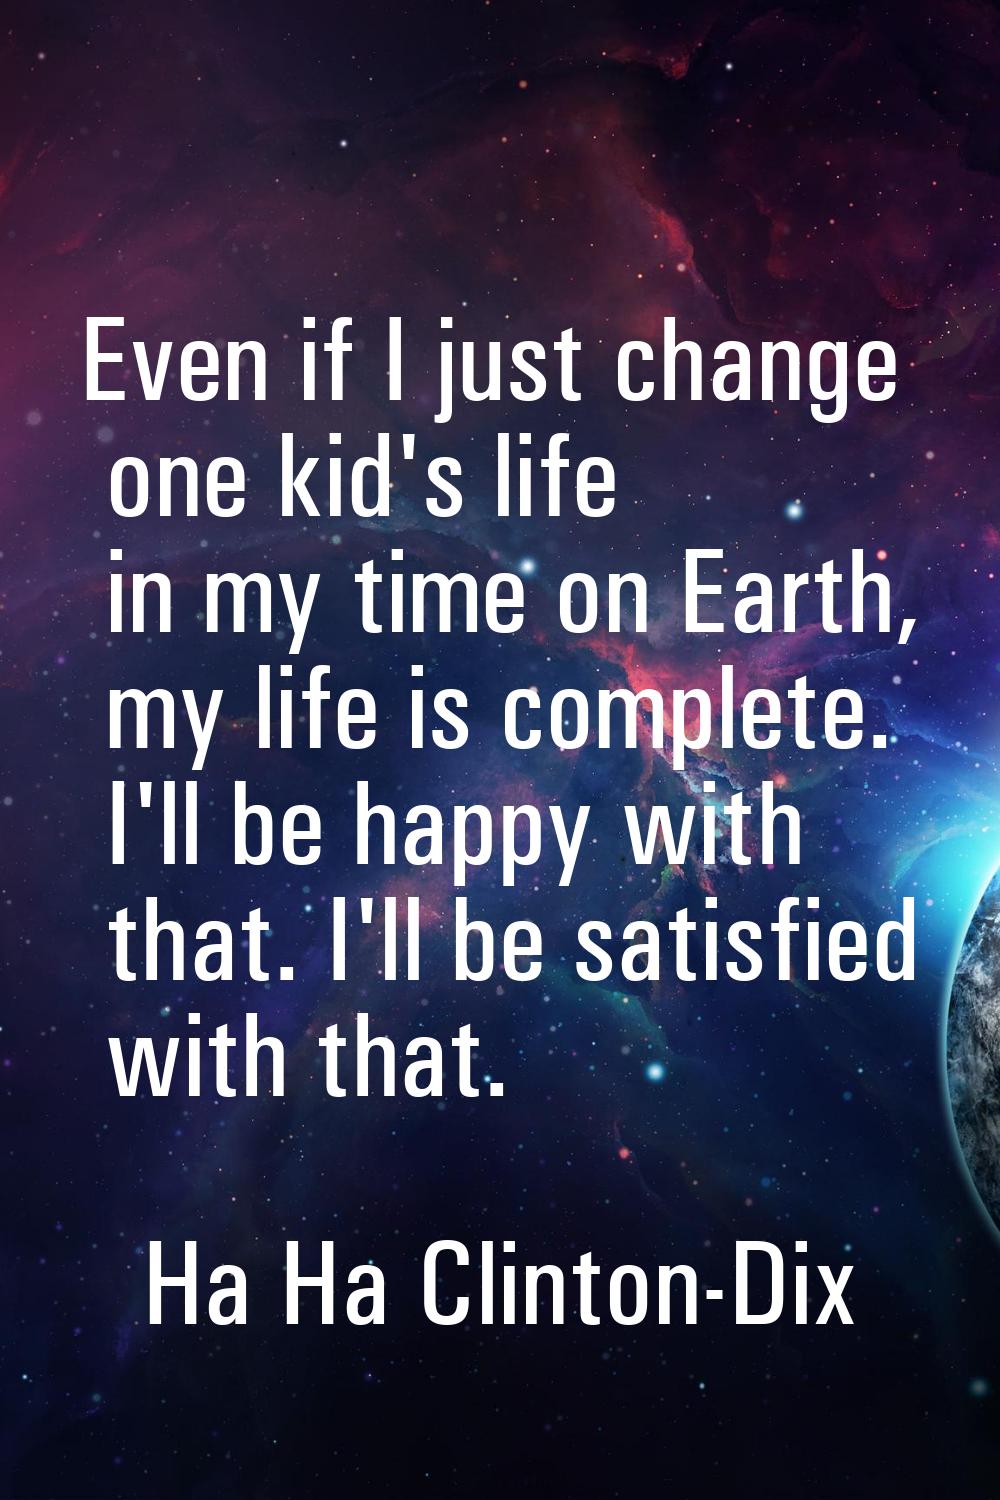 Even if I just change one kid's life in my time on Earth, my life is complete. I'll be happy with t